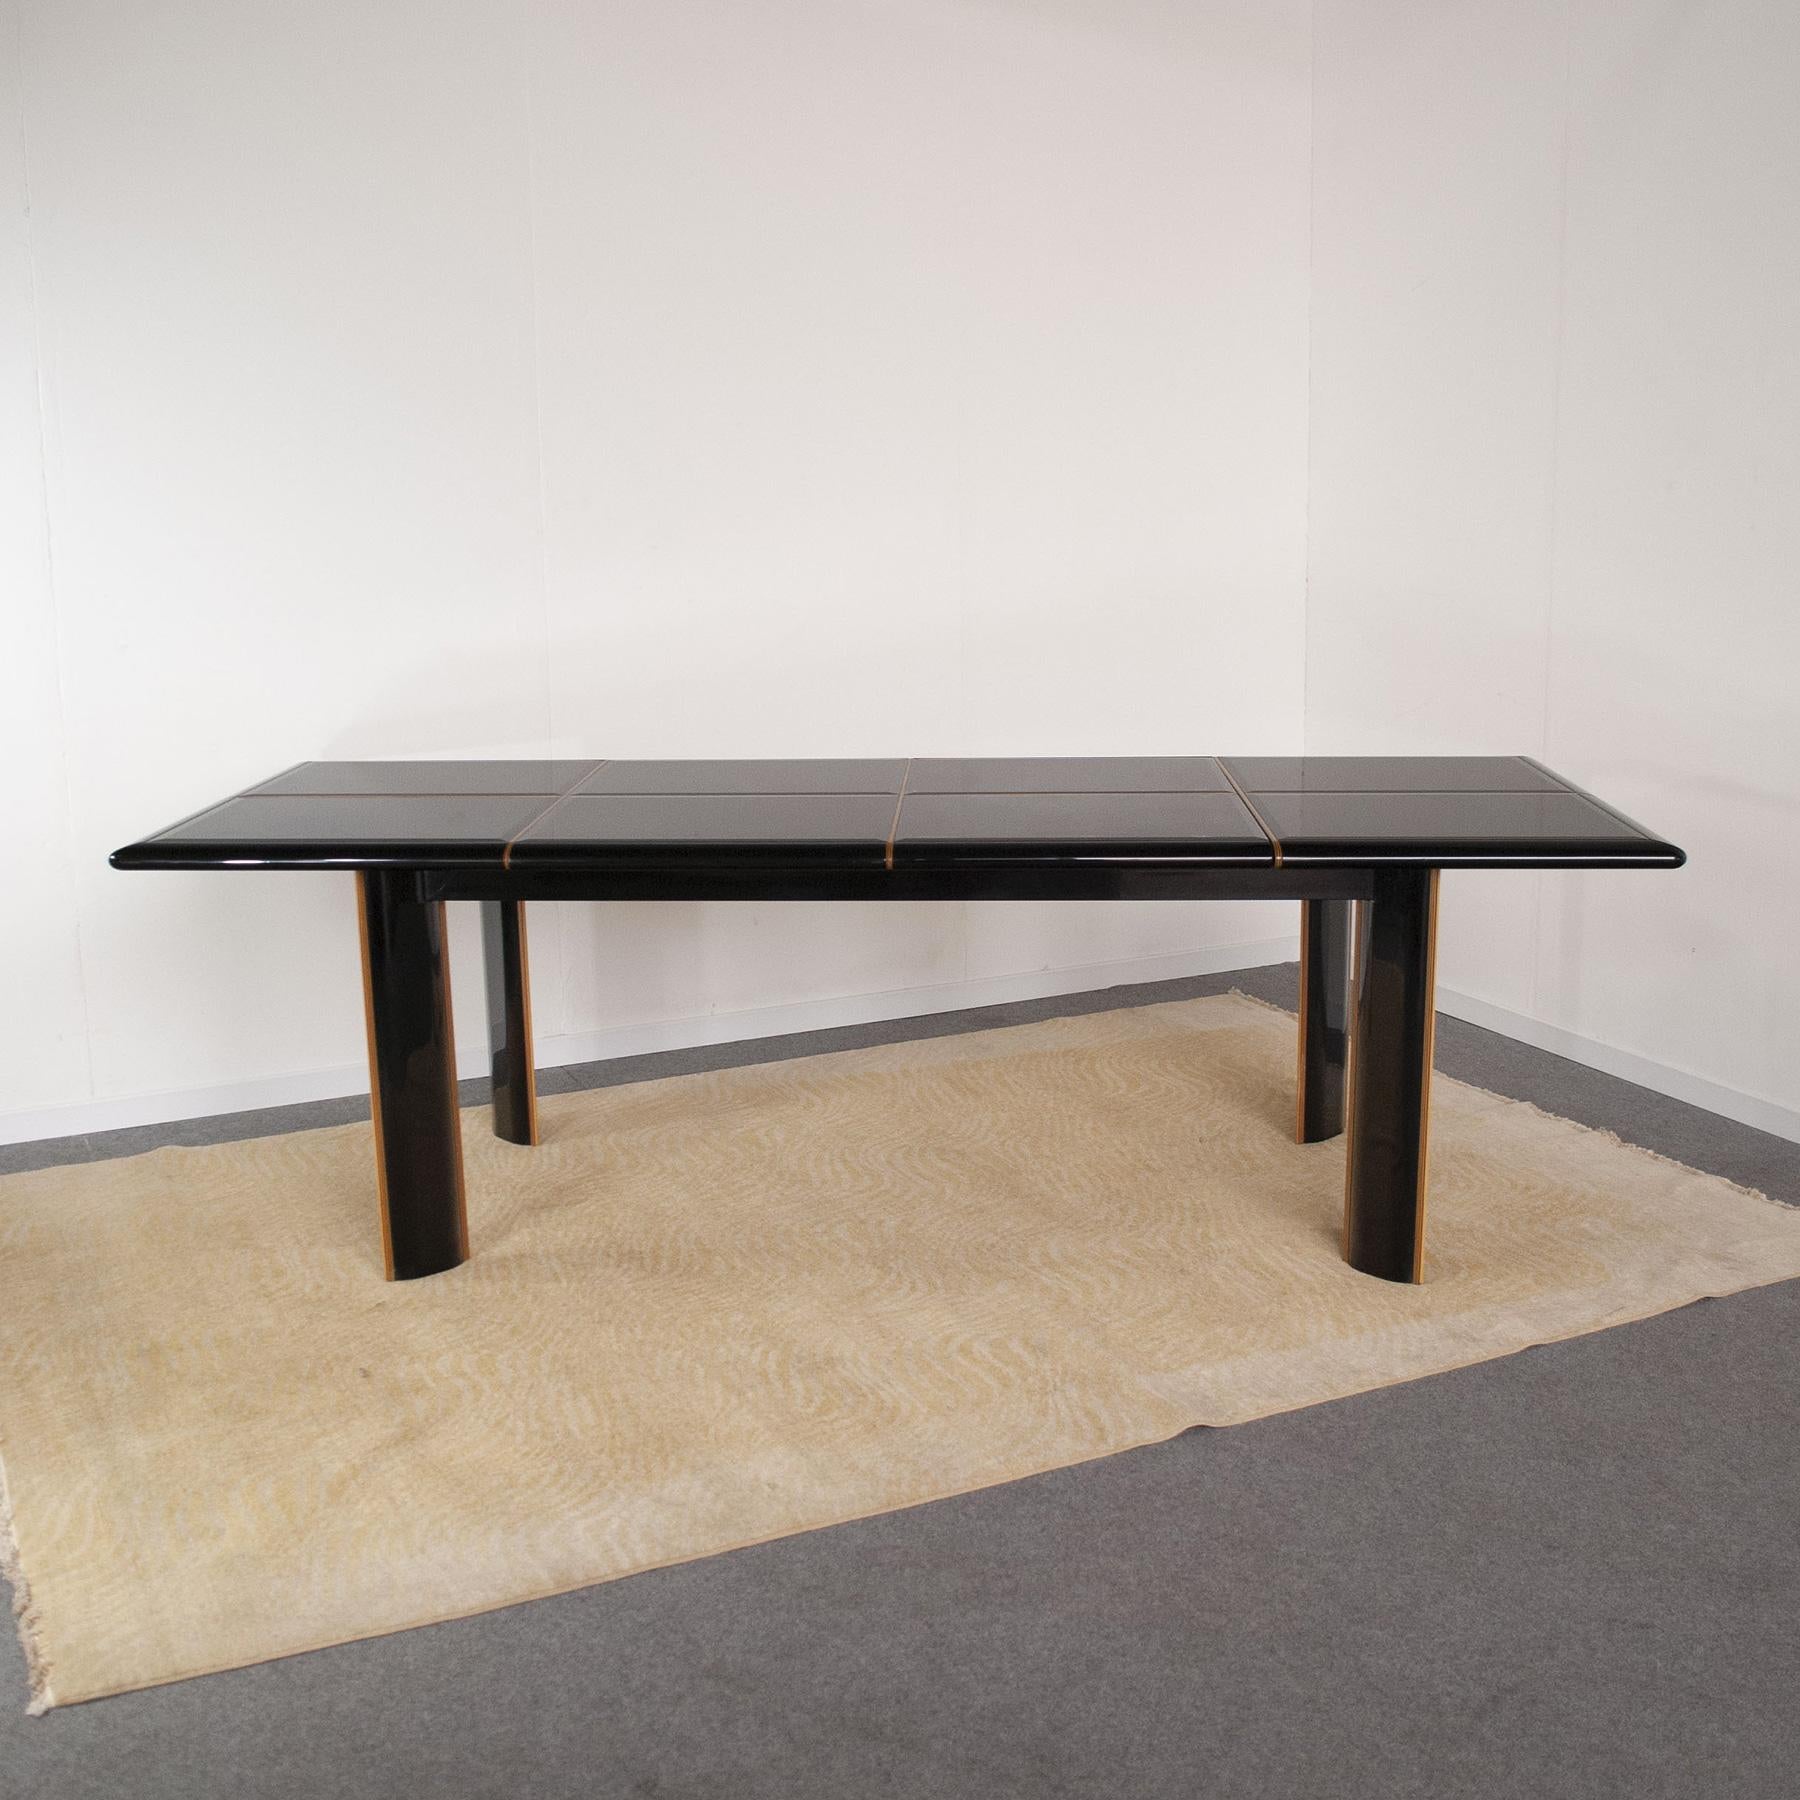 Large black lacquered extensible dining table with top composed of rectangular shaped lacquered glass elements, elegant inserts in light maple wood are present throughout the table, a model made in France by the designer Roche Bobois for Pierre